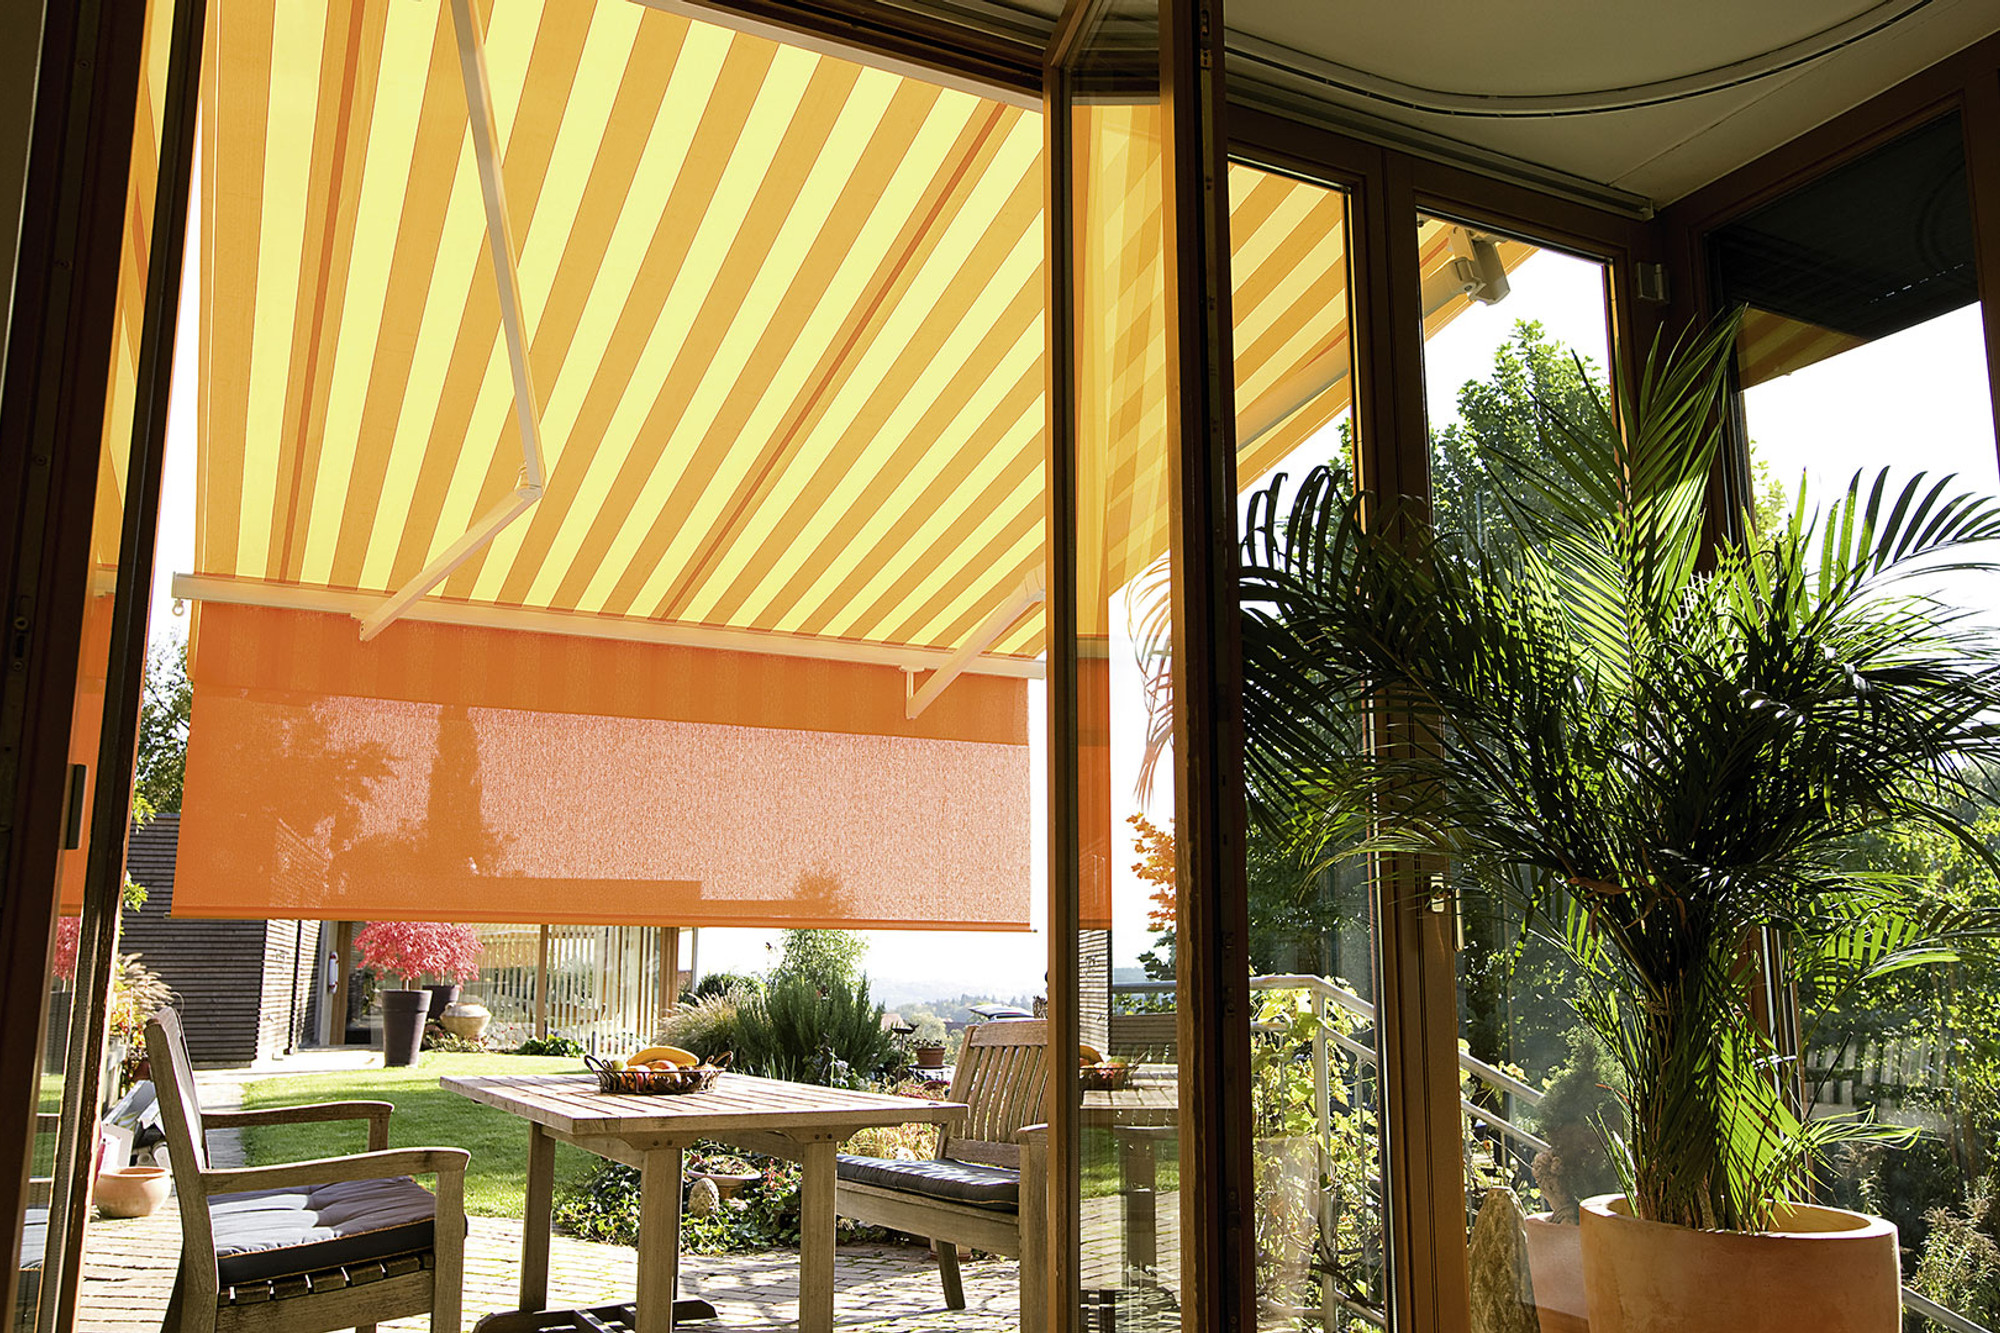 Product: Jointed arm awning – TOPLINE PLUS